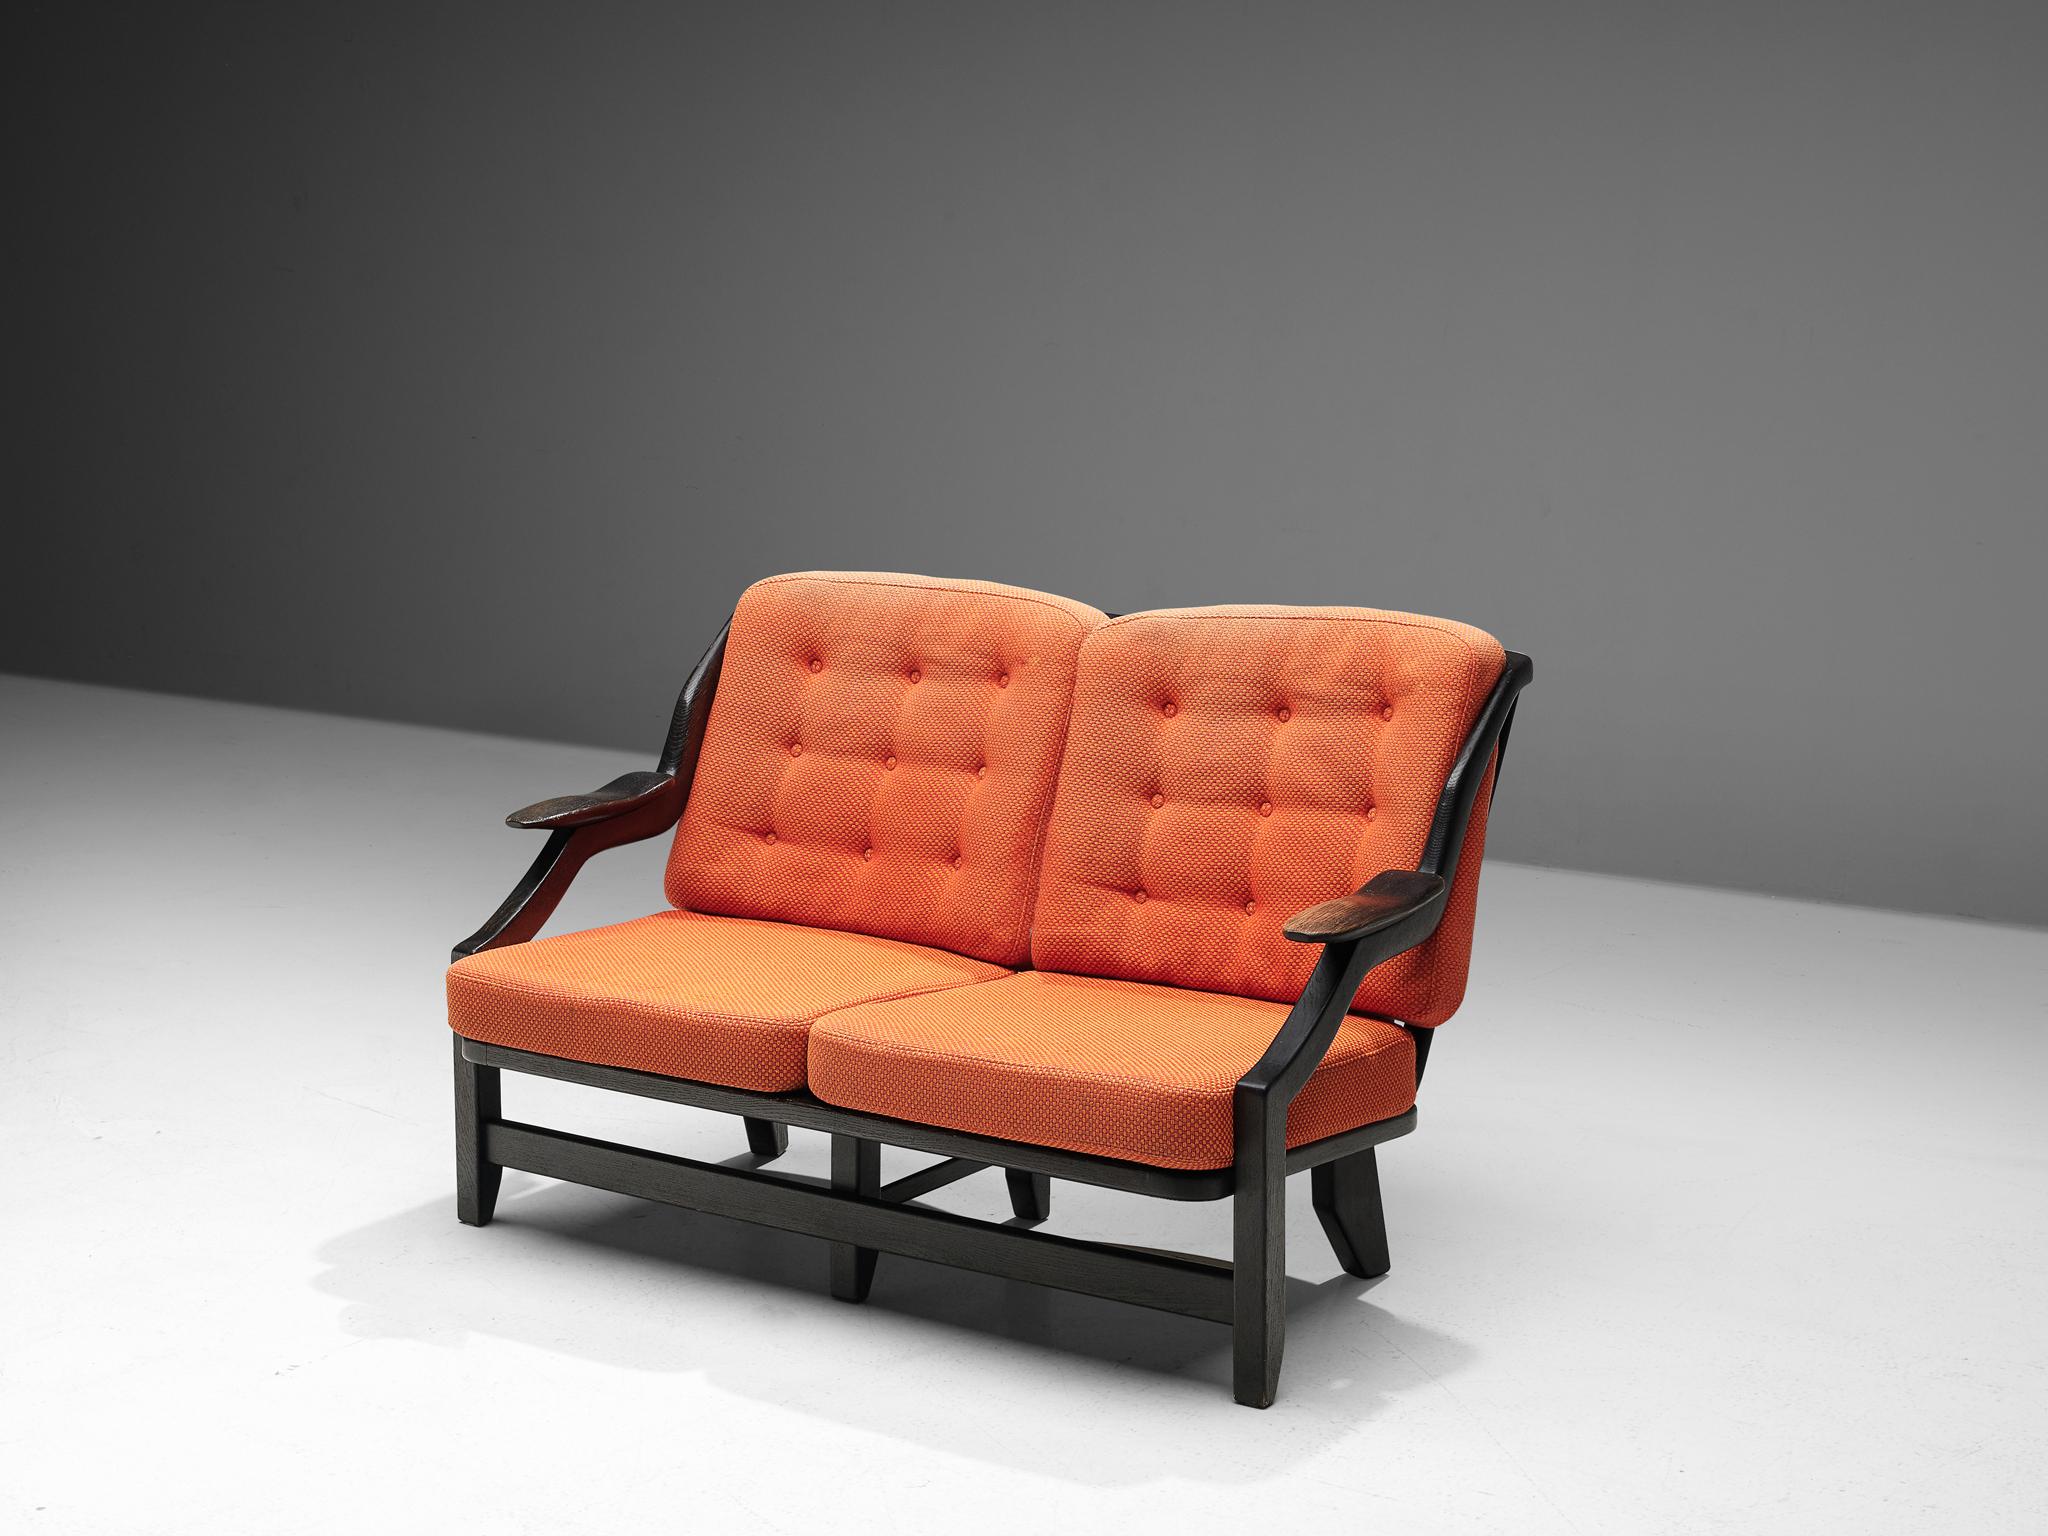 Guillerme & Chambron, settee, orange fabric and dark stained oak, France, 1950s.

A small sofa by Guillerme et Chambron, this French designer duo is known for their extreme high quality solid oak furniture, from which this orange bench is another